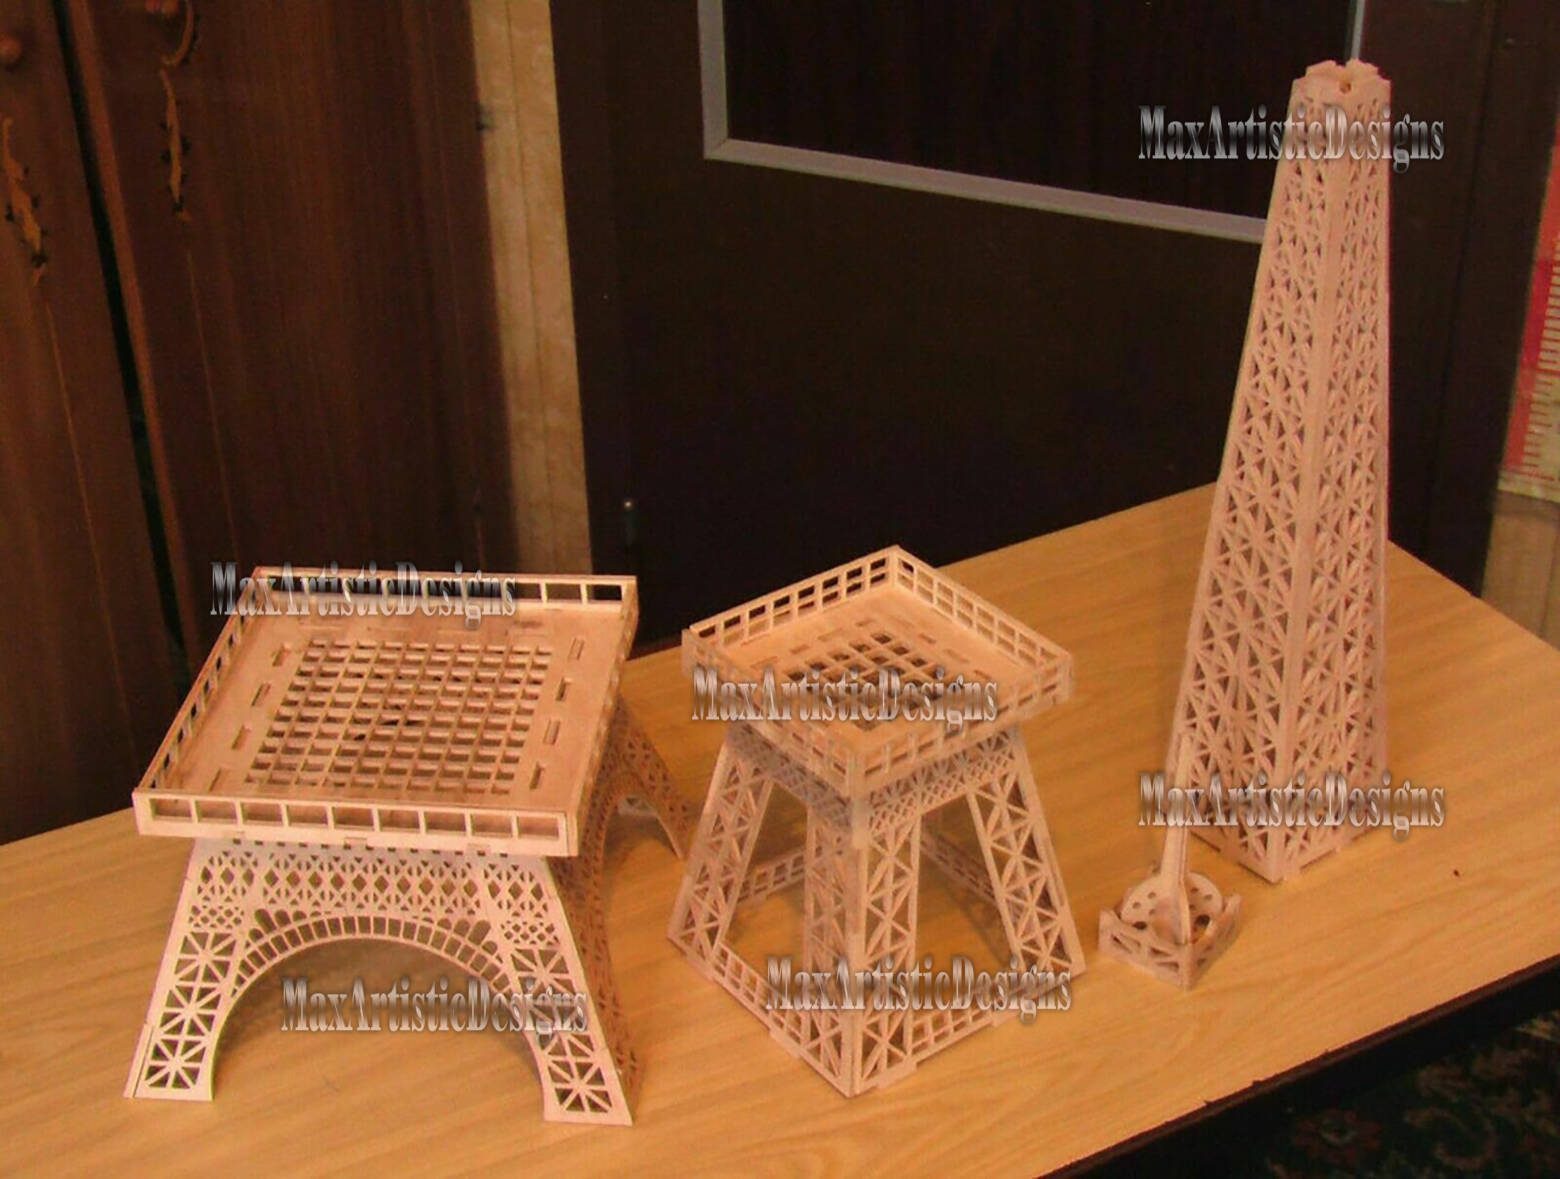 mega pack +80000 laser cut vector dxf cdr 2d 3d files architecture and everything for cnc router plasma cut